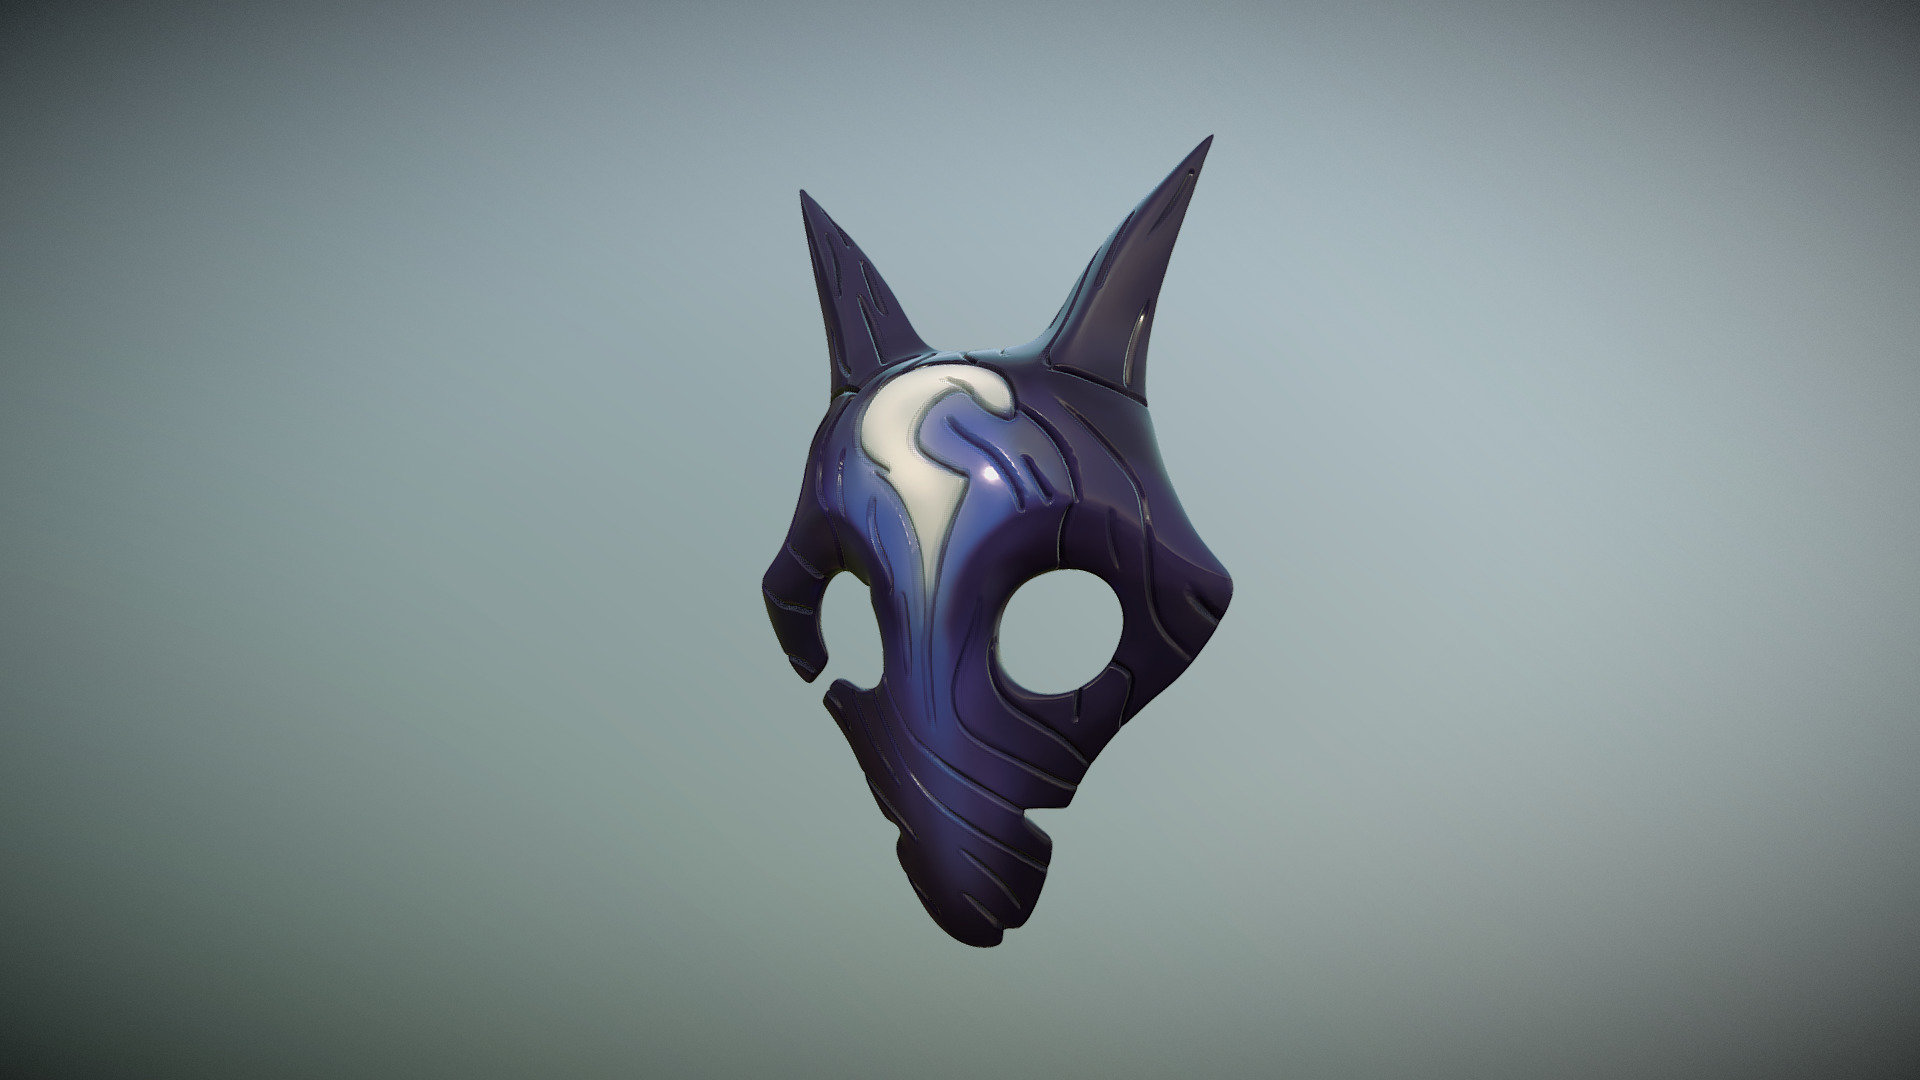 Fast sculpt of Kindred wolf mask from League of Legends.
Made it for 3D print - Kindred Wolf Mask - 3D model by Valeria Traverso (@twint) 3d model